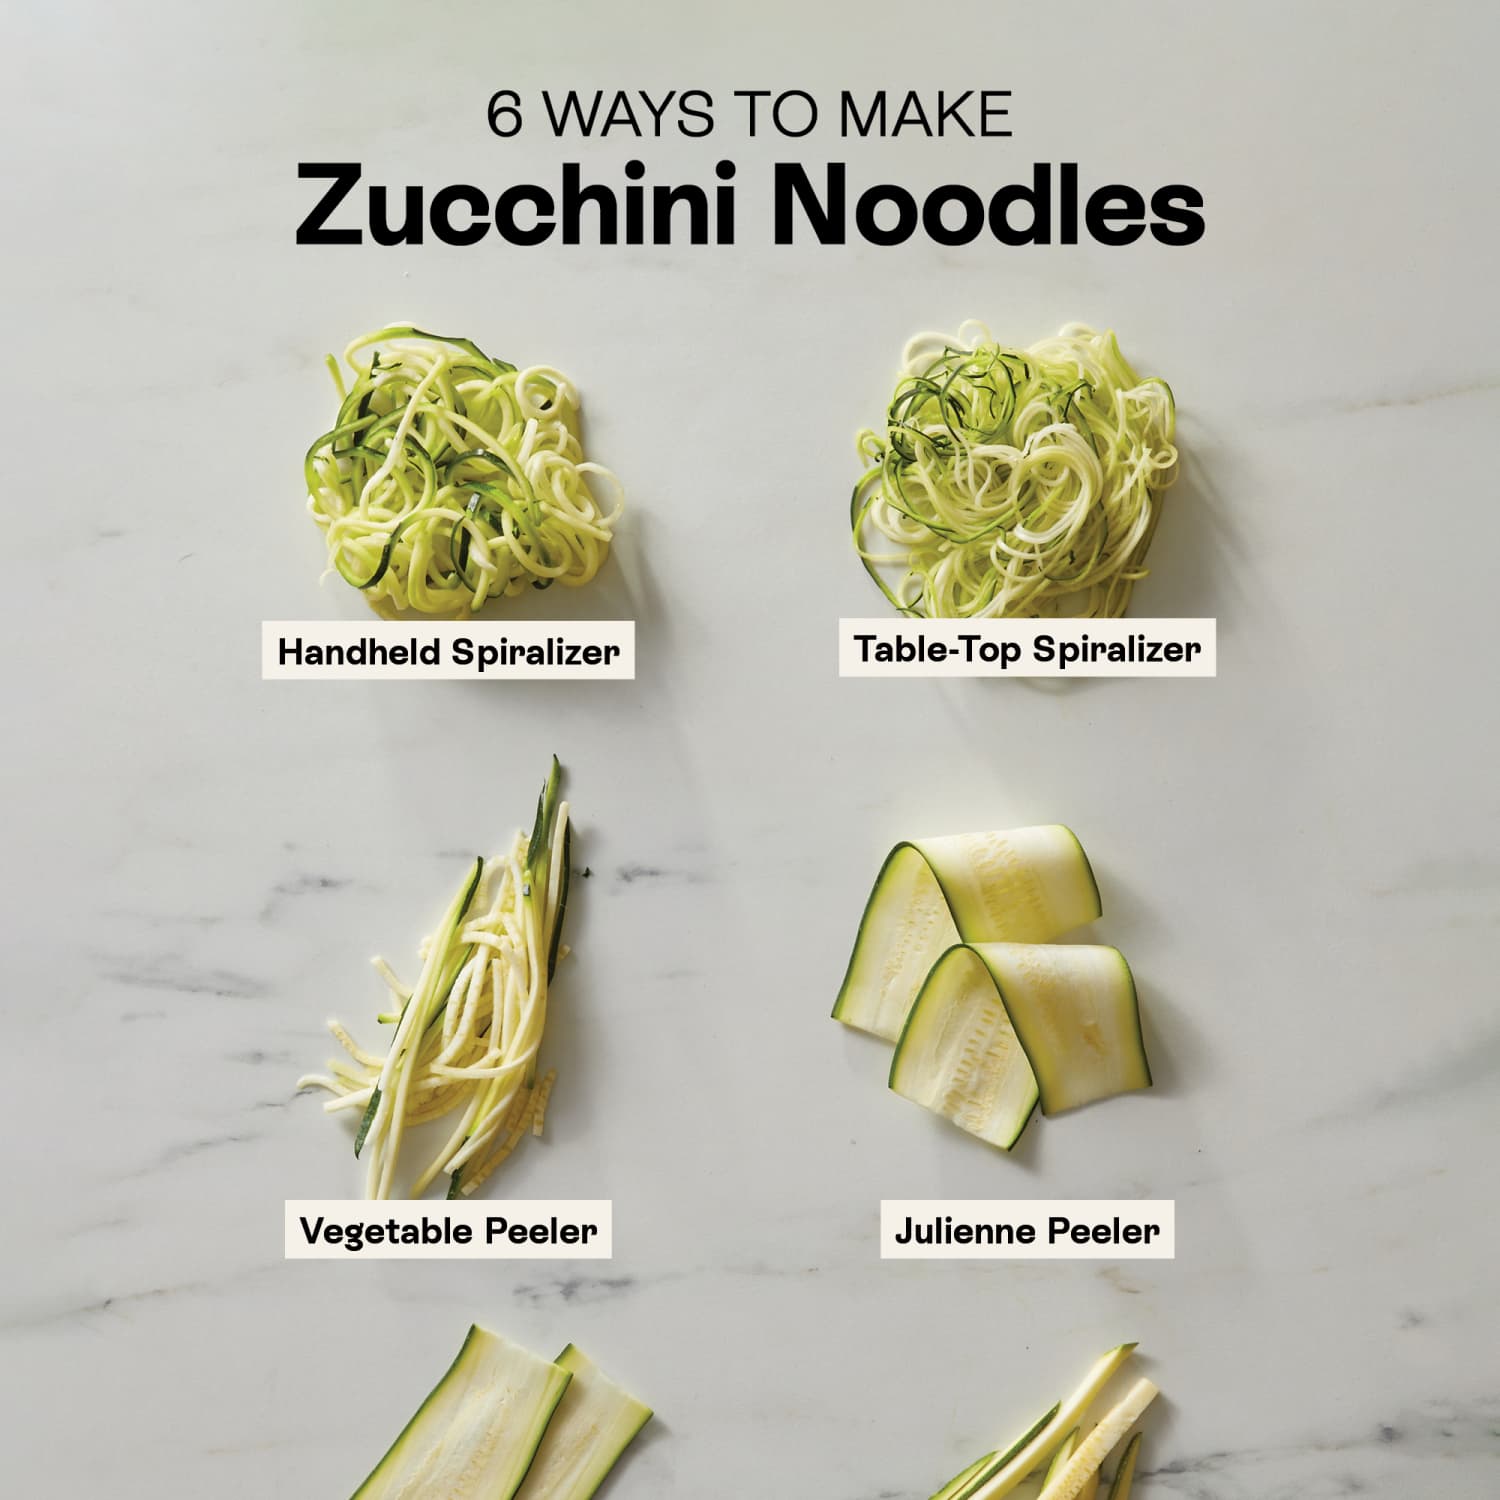 How To Make Zucchini Noodles (4 Easy Ways) | Kitchn